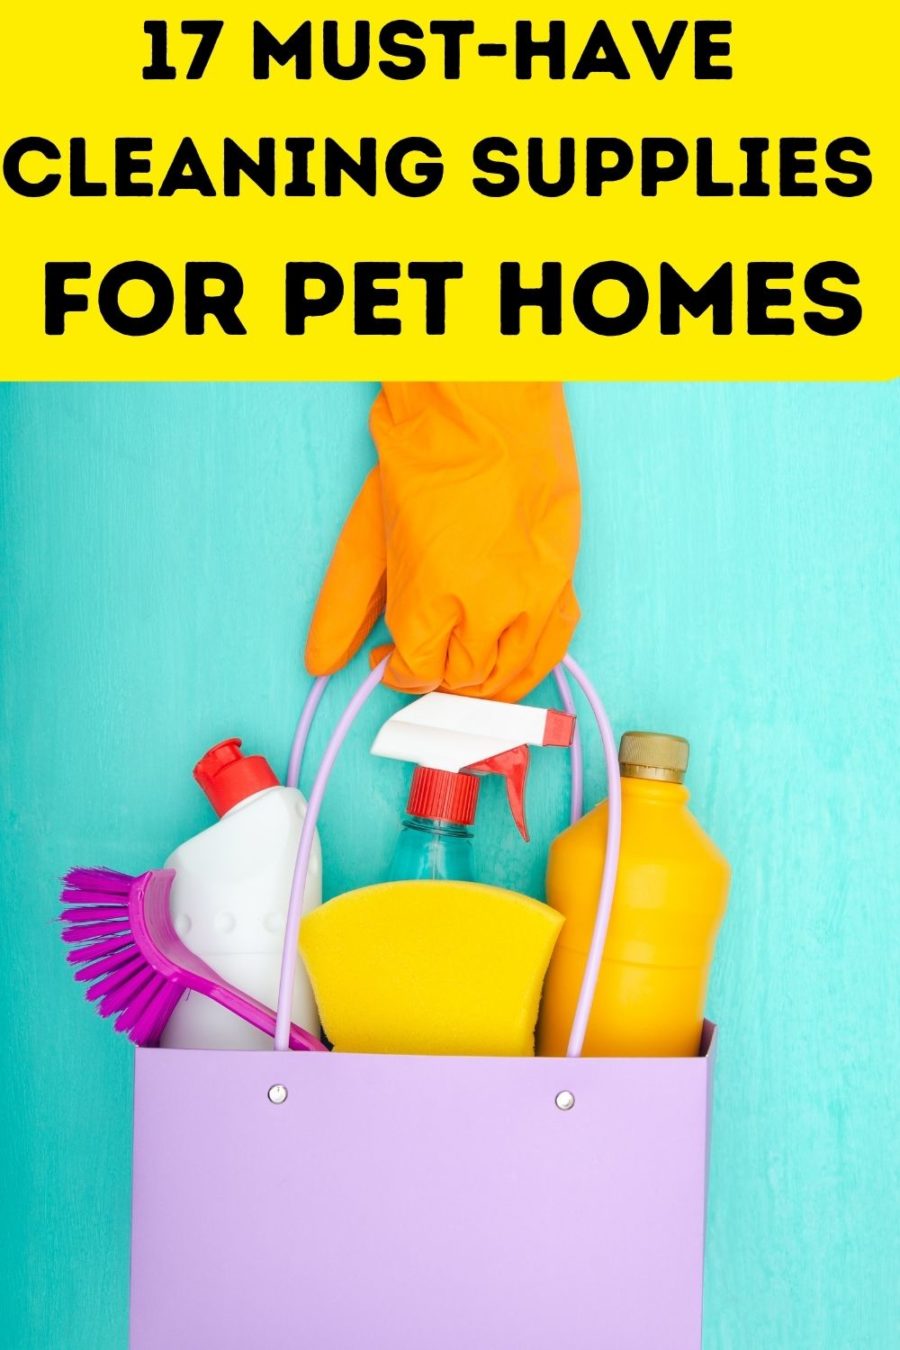 17 Must-Have Cleaning Supplies for Pet Homes